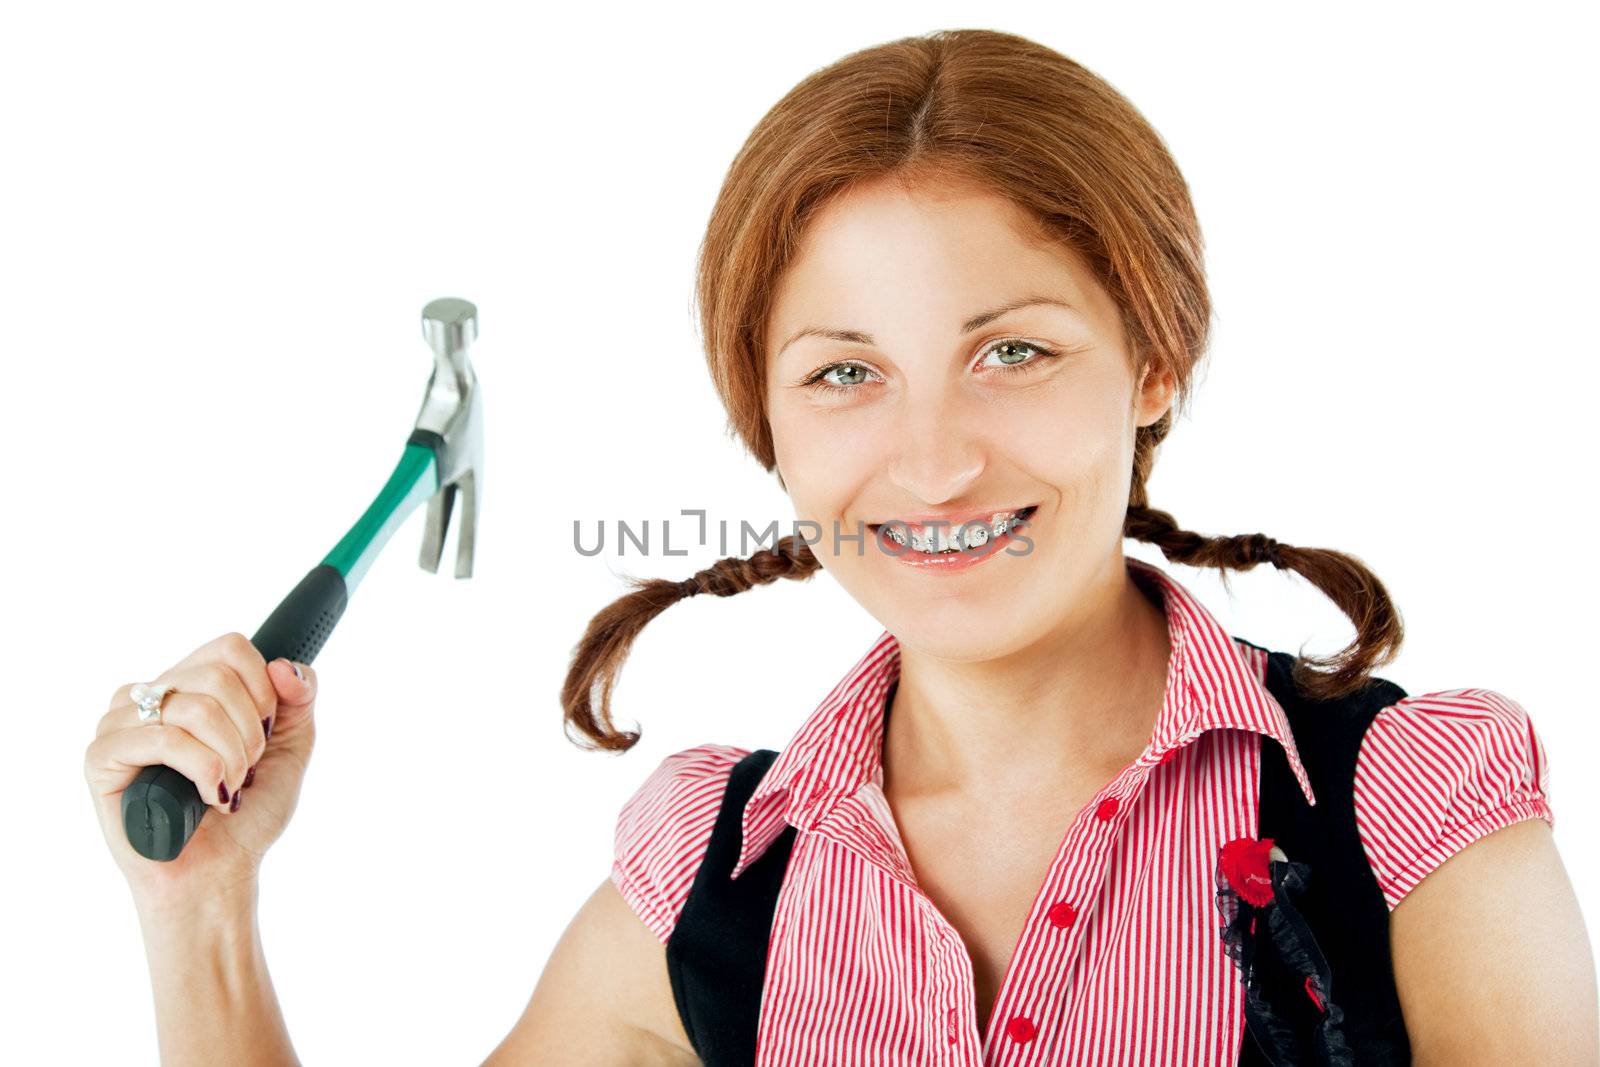 smiling red head with braids and braces holding claw hammer